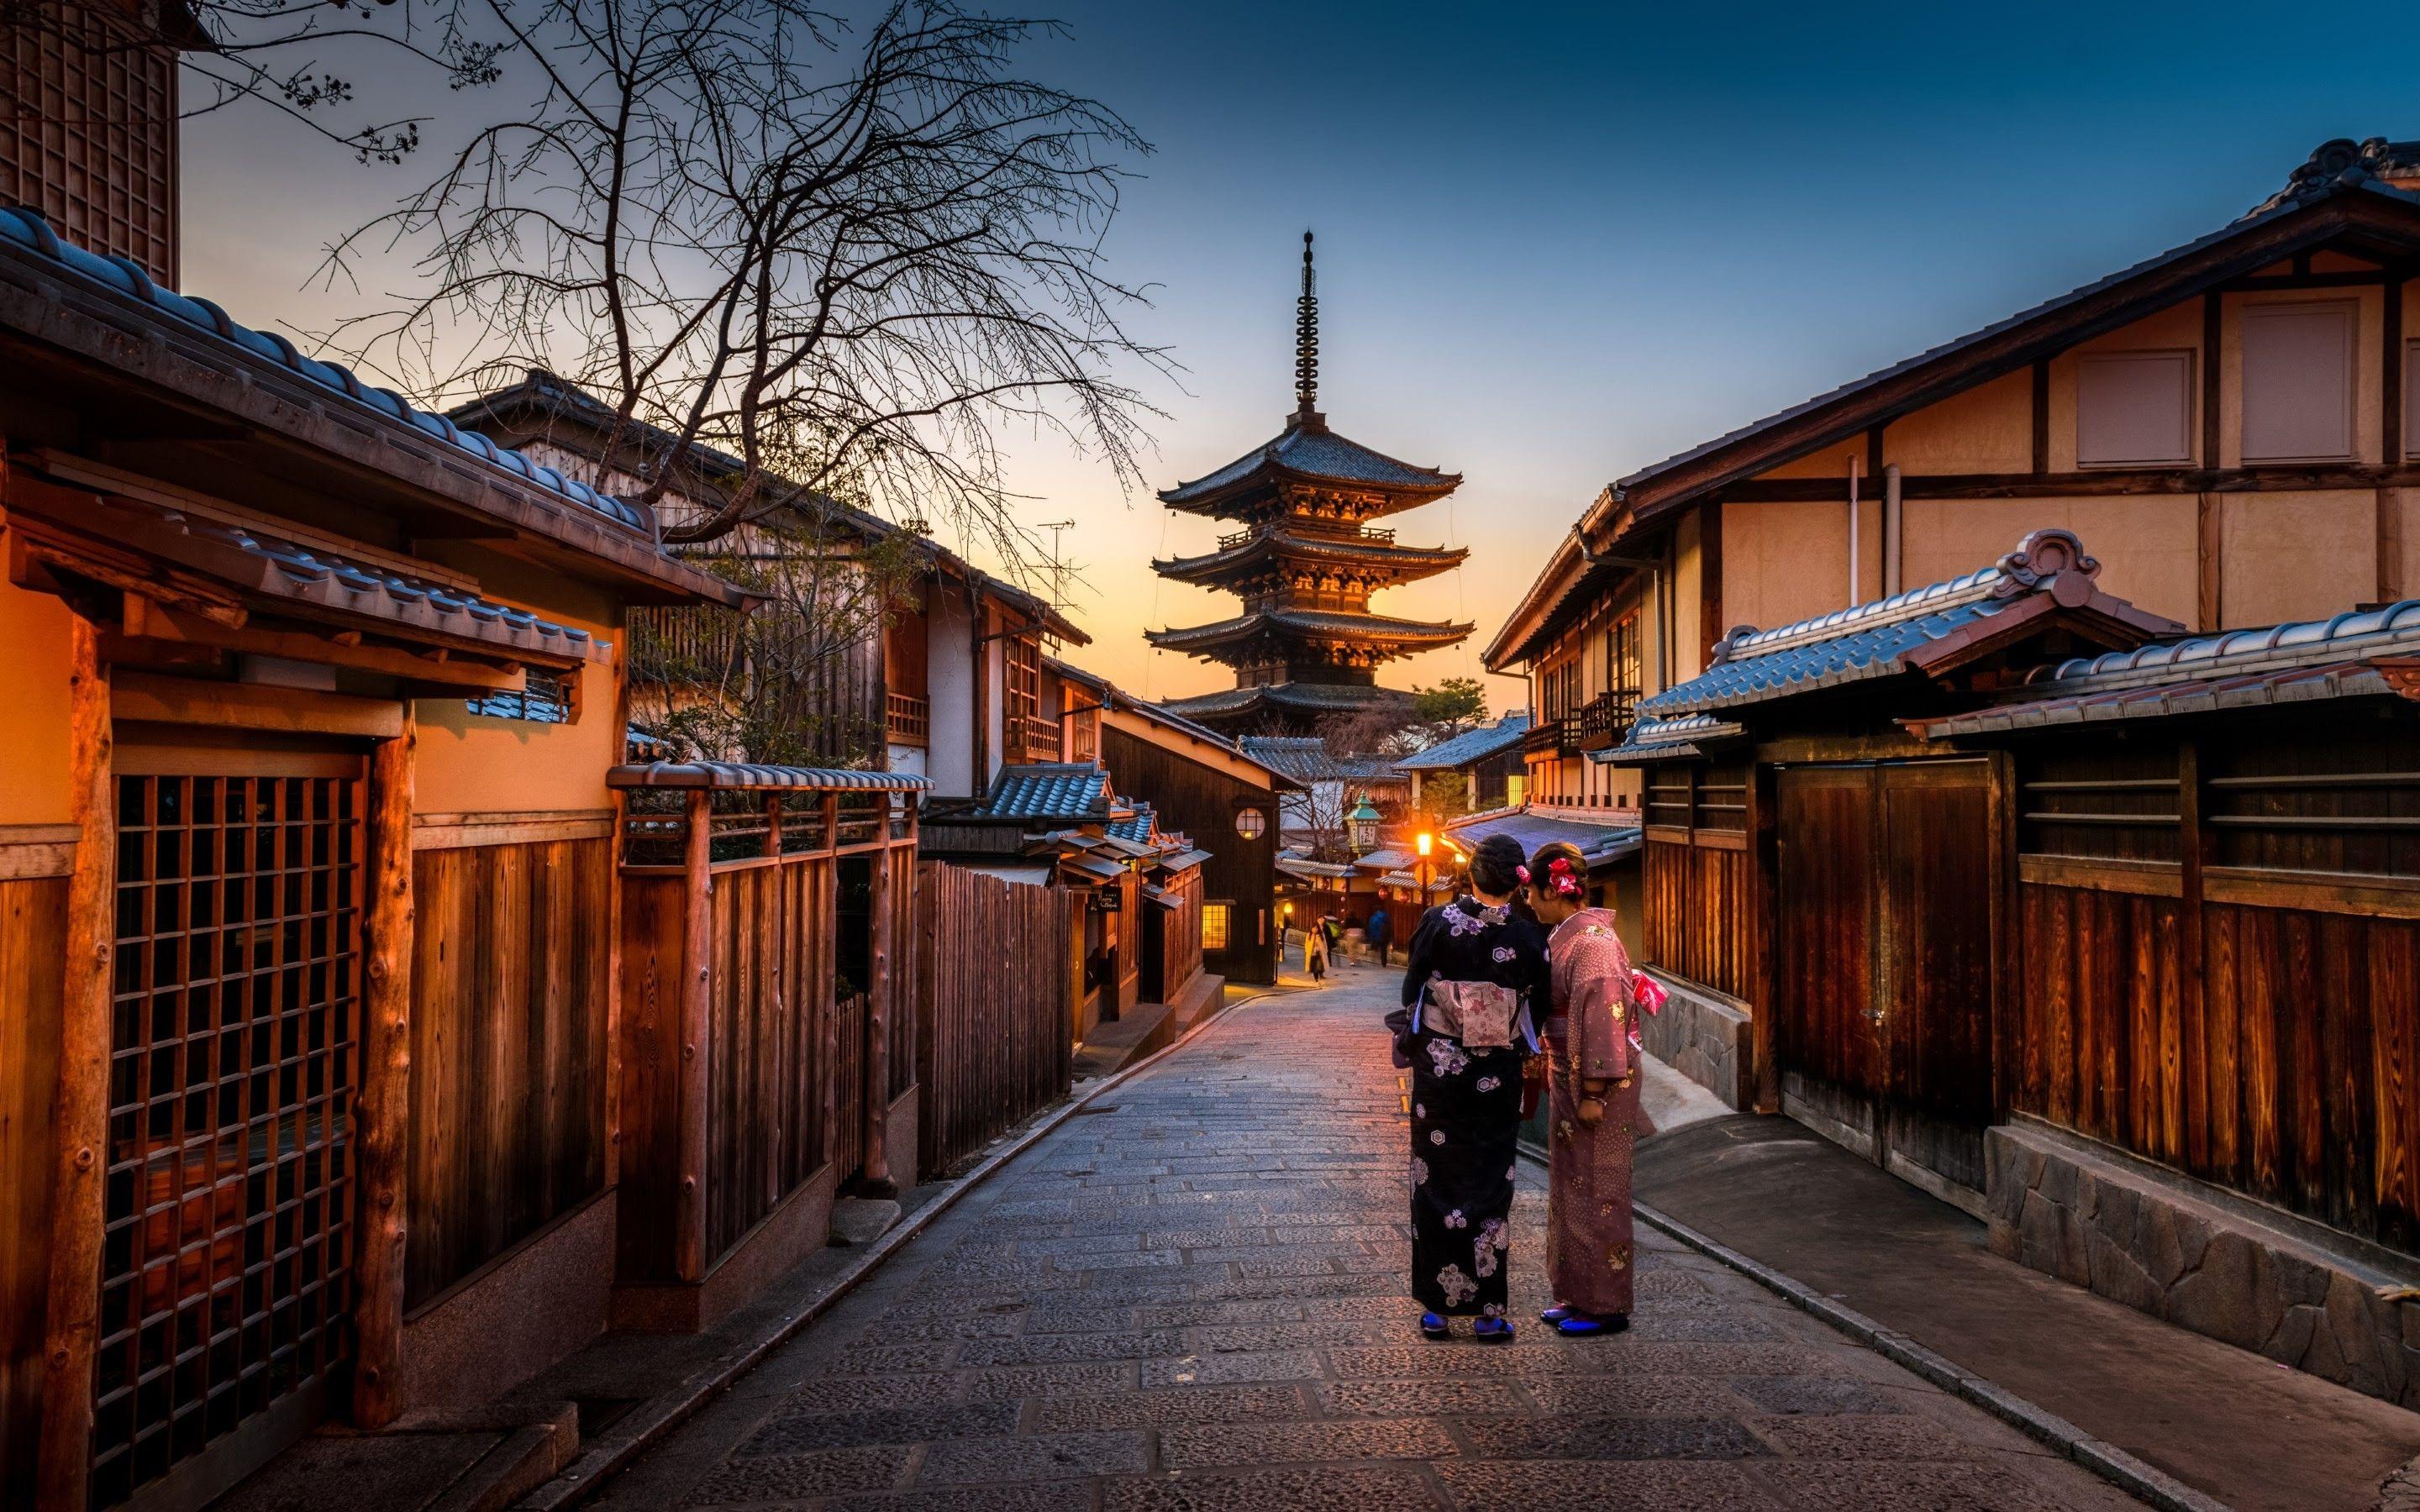 Kyoto 4k Wallpapers Top Free Kyoto 4k Backgrounds Wallpaperaccess